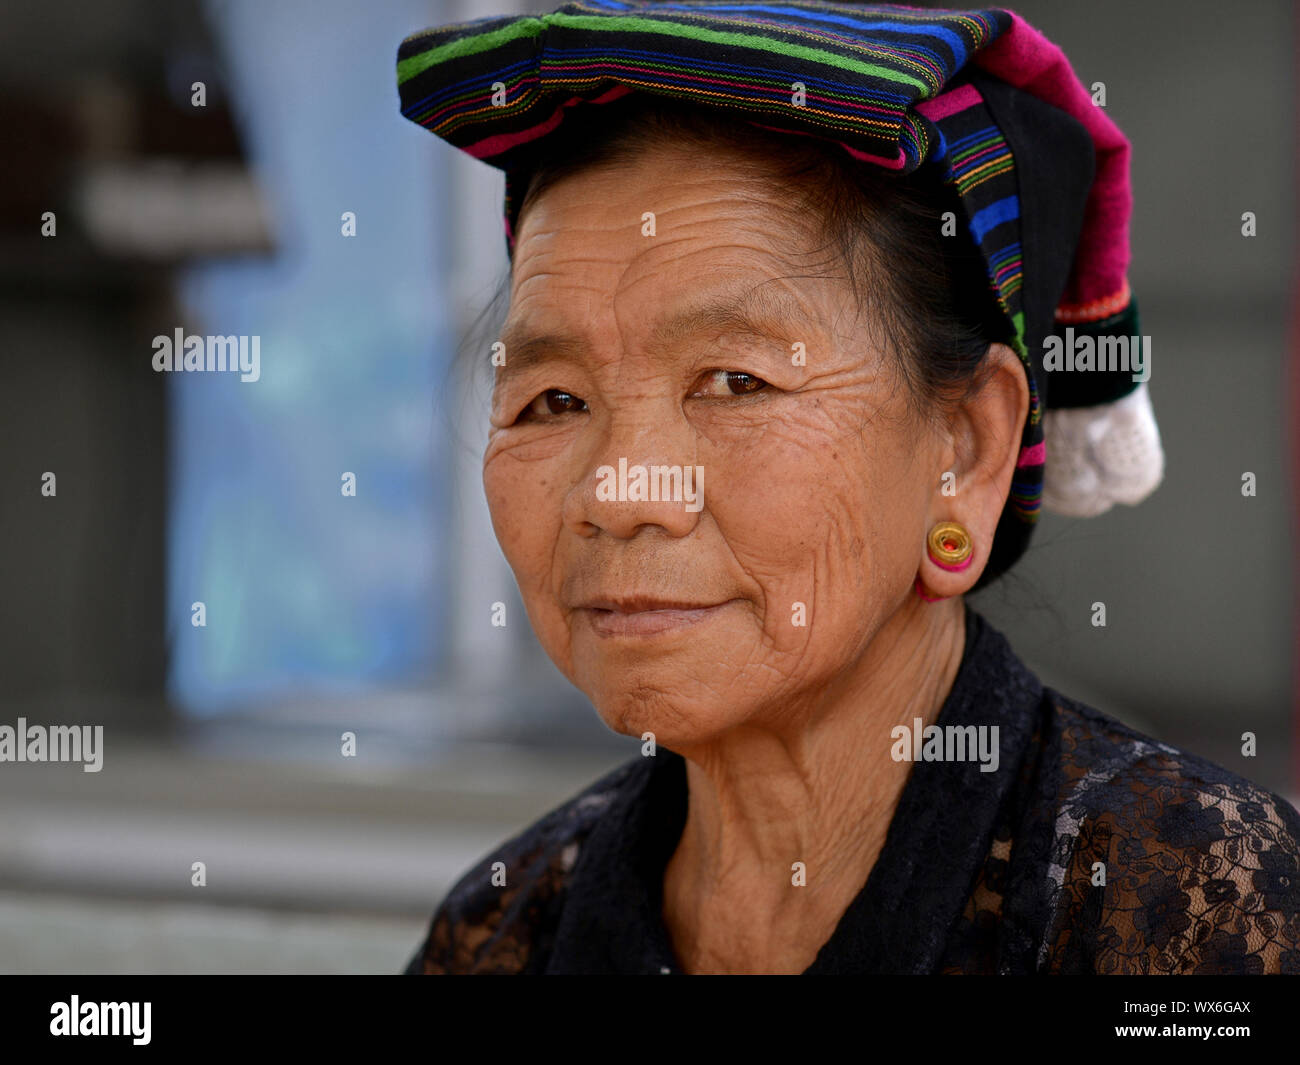 Elderly Myanmarese Palaung/Palong tribal woman with traditional earlobe plugs poses for the camera. Stock Photo